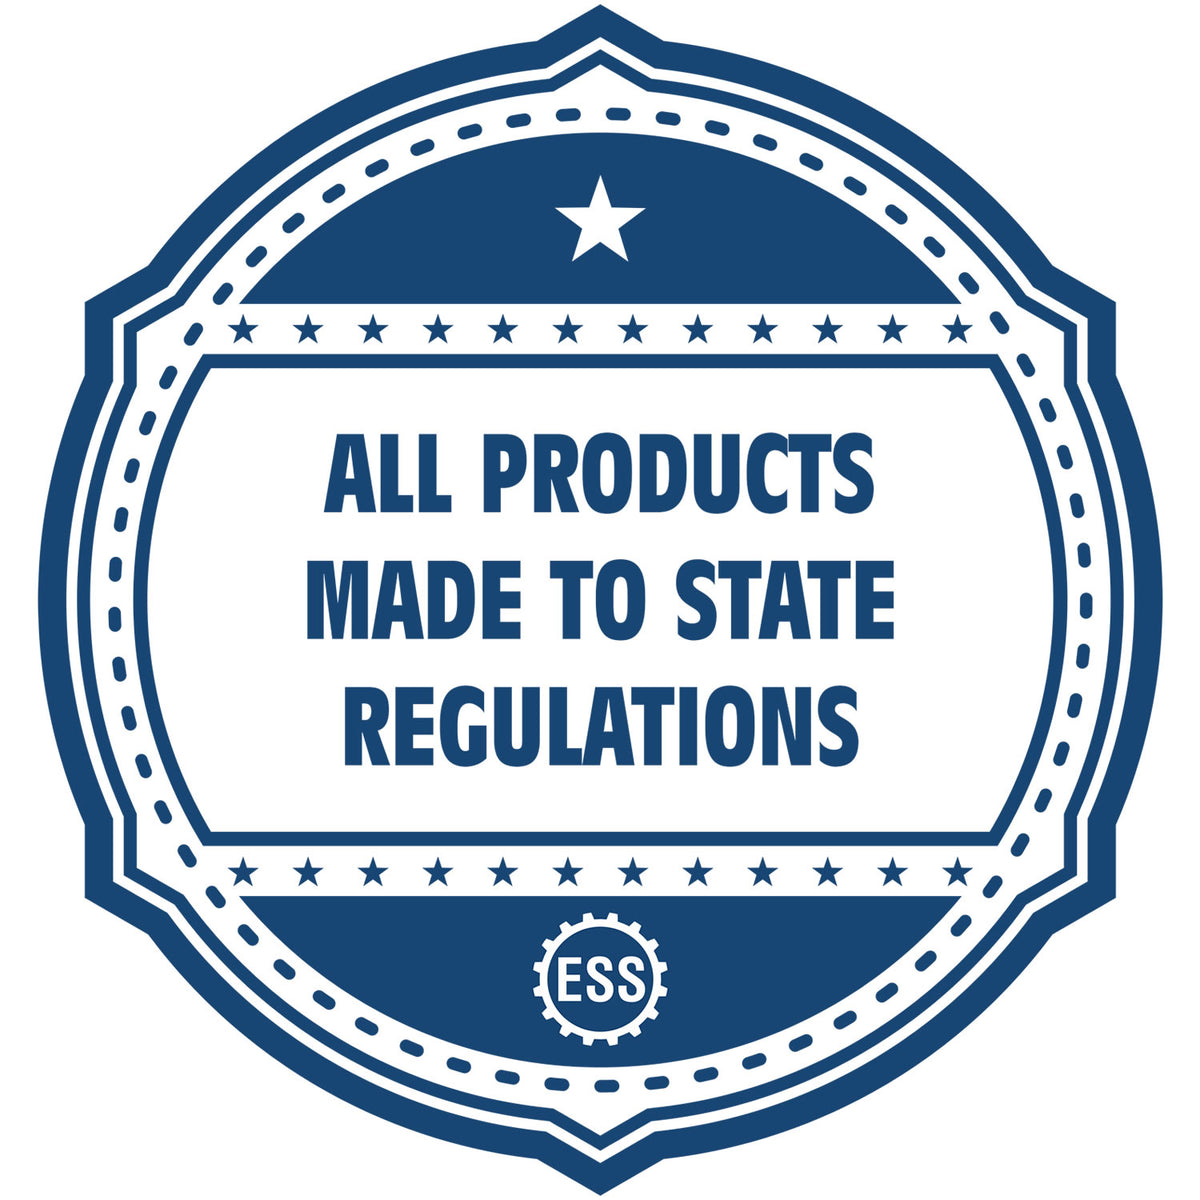 An icon or badge element for the Long Reach Florida Land Surveyor Seal showing that this product is made in compliance with state regulations.